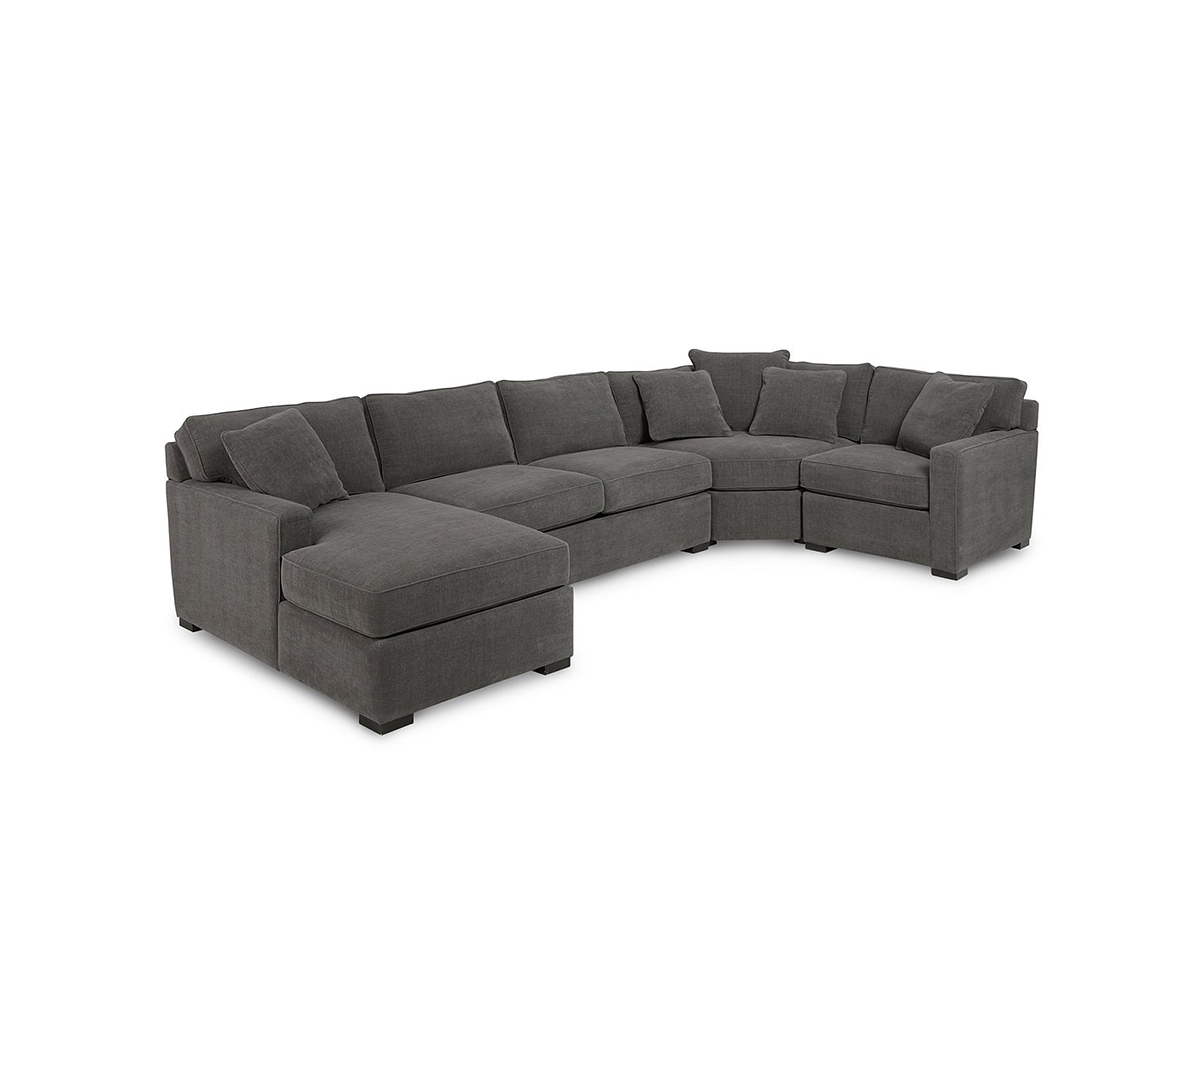 1101388 Radley 4-Pc. Fabric Chaise Sectional Sofa with Wed sku 1101388